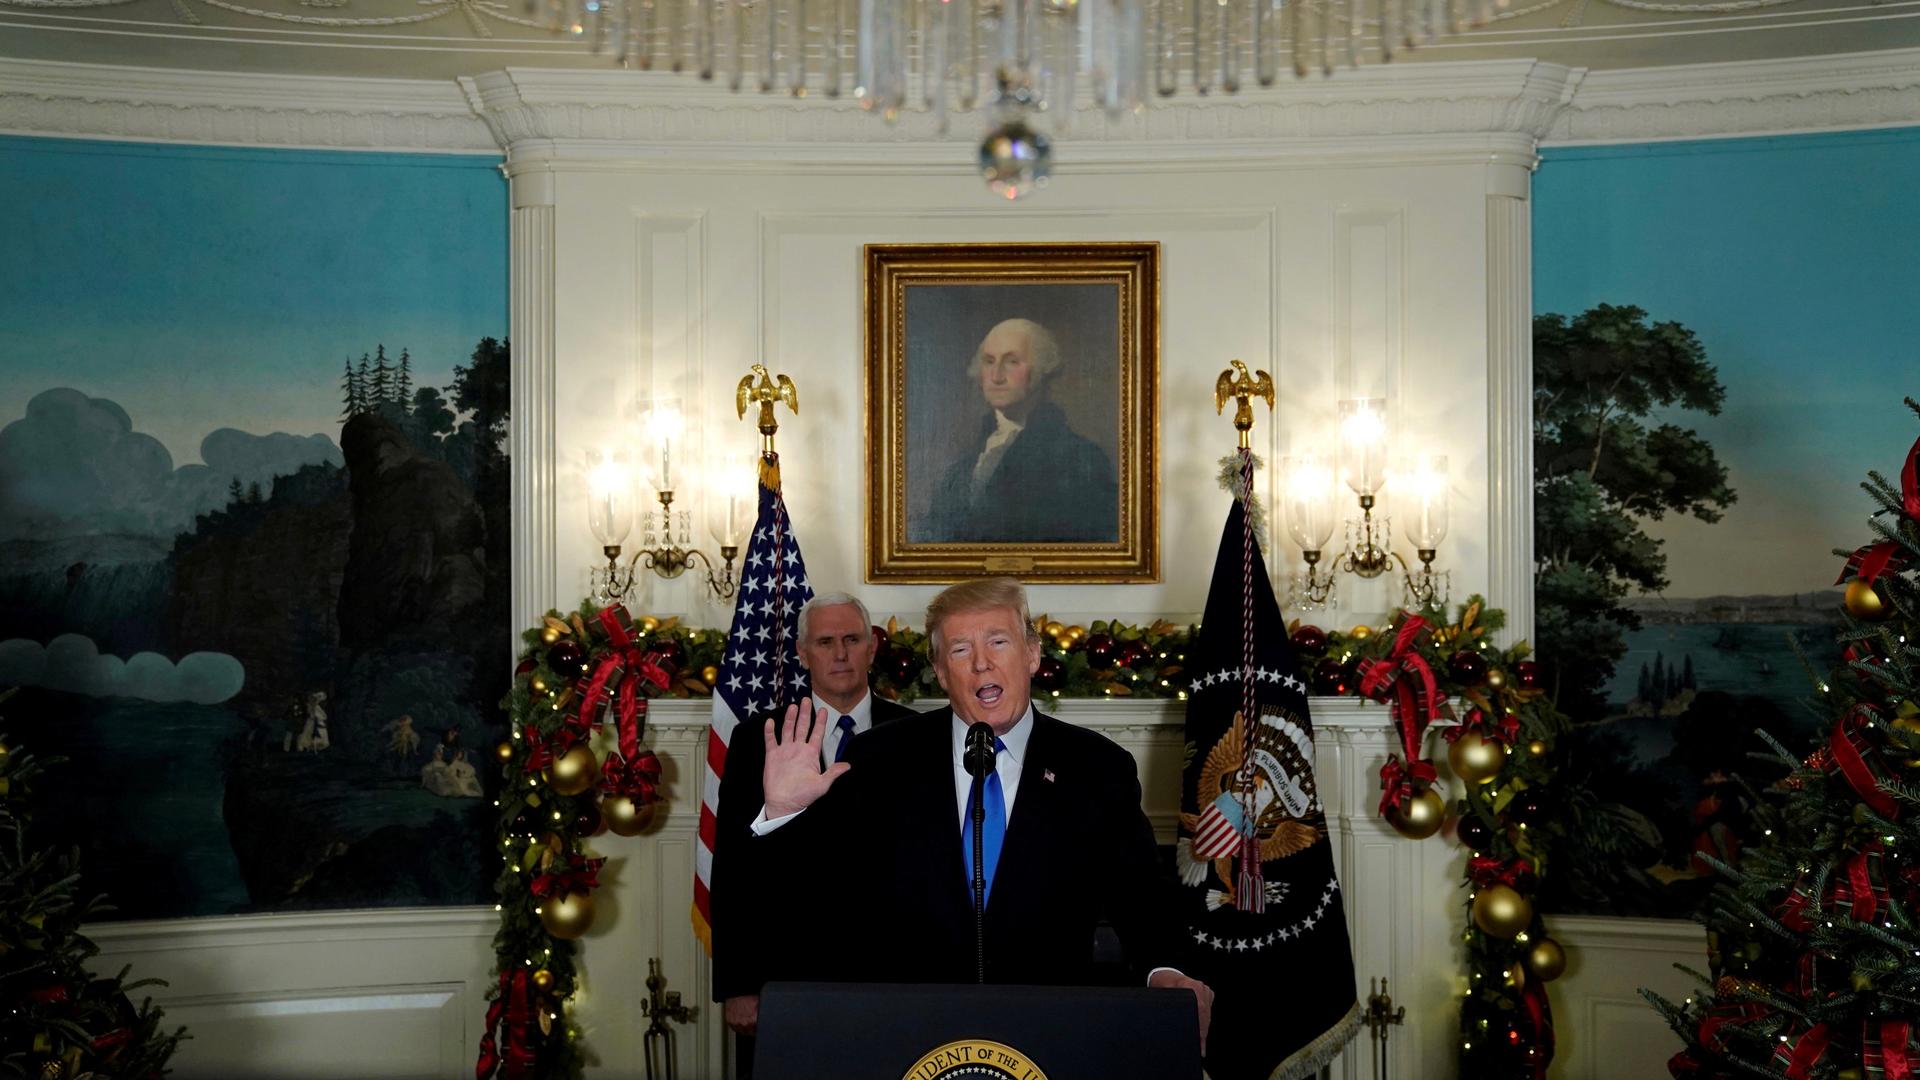 President Donald Trump, flanked by Vice President Mike Pence, delivers remarks recognizing Jerusalem as the capital of Israel at the White House in Washington, DC on December 6, 2017.